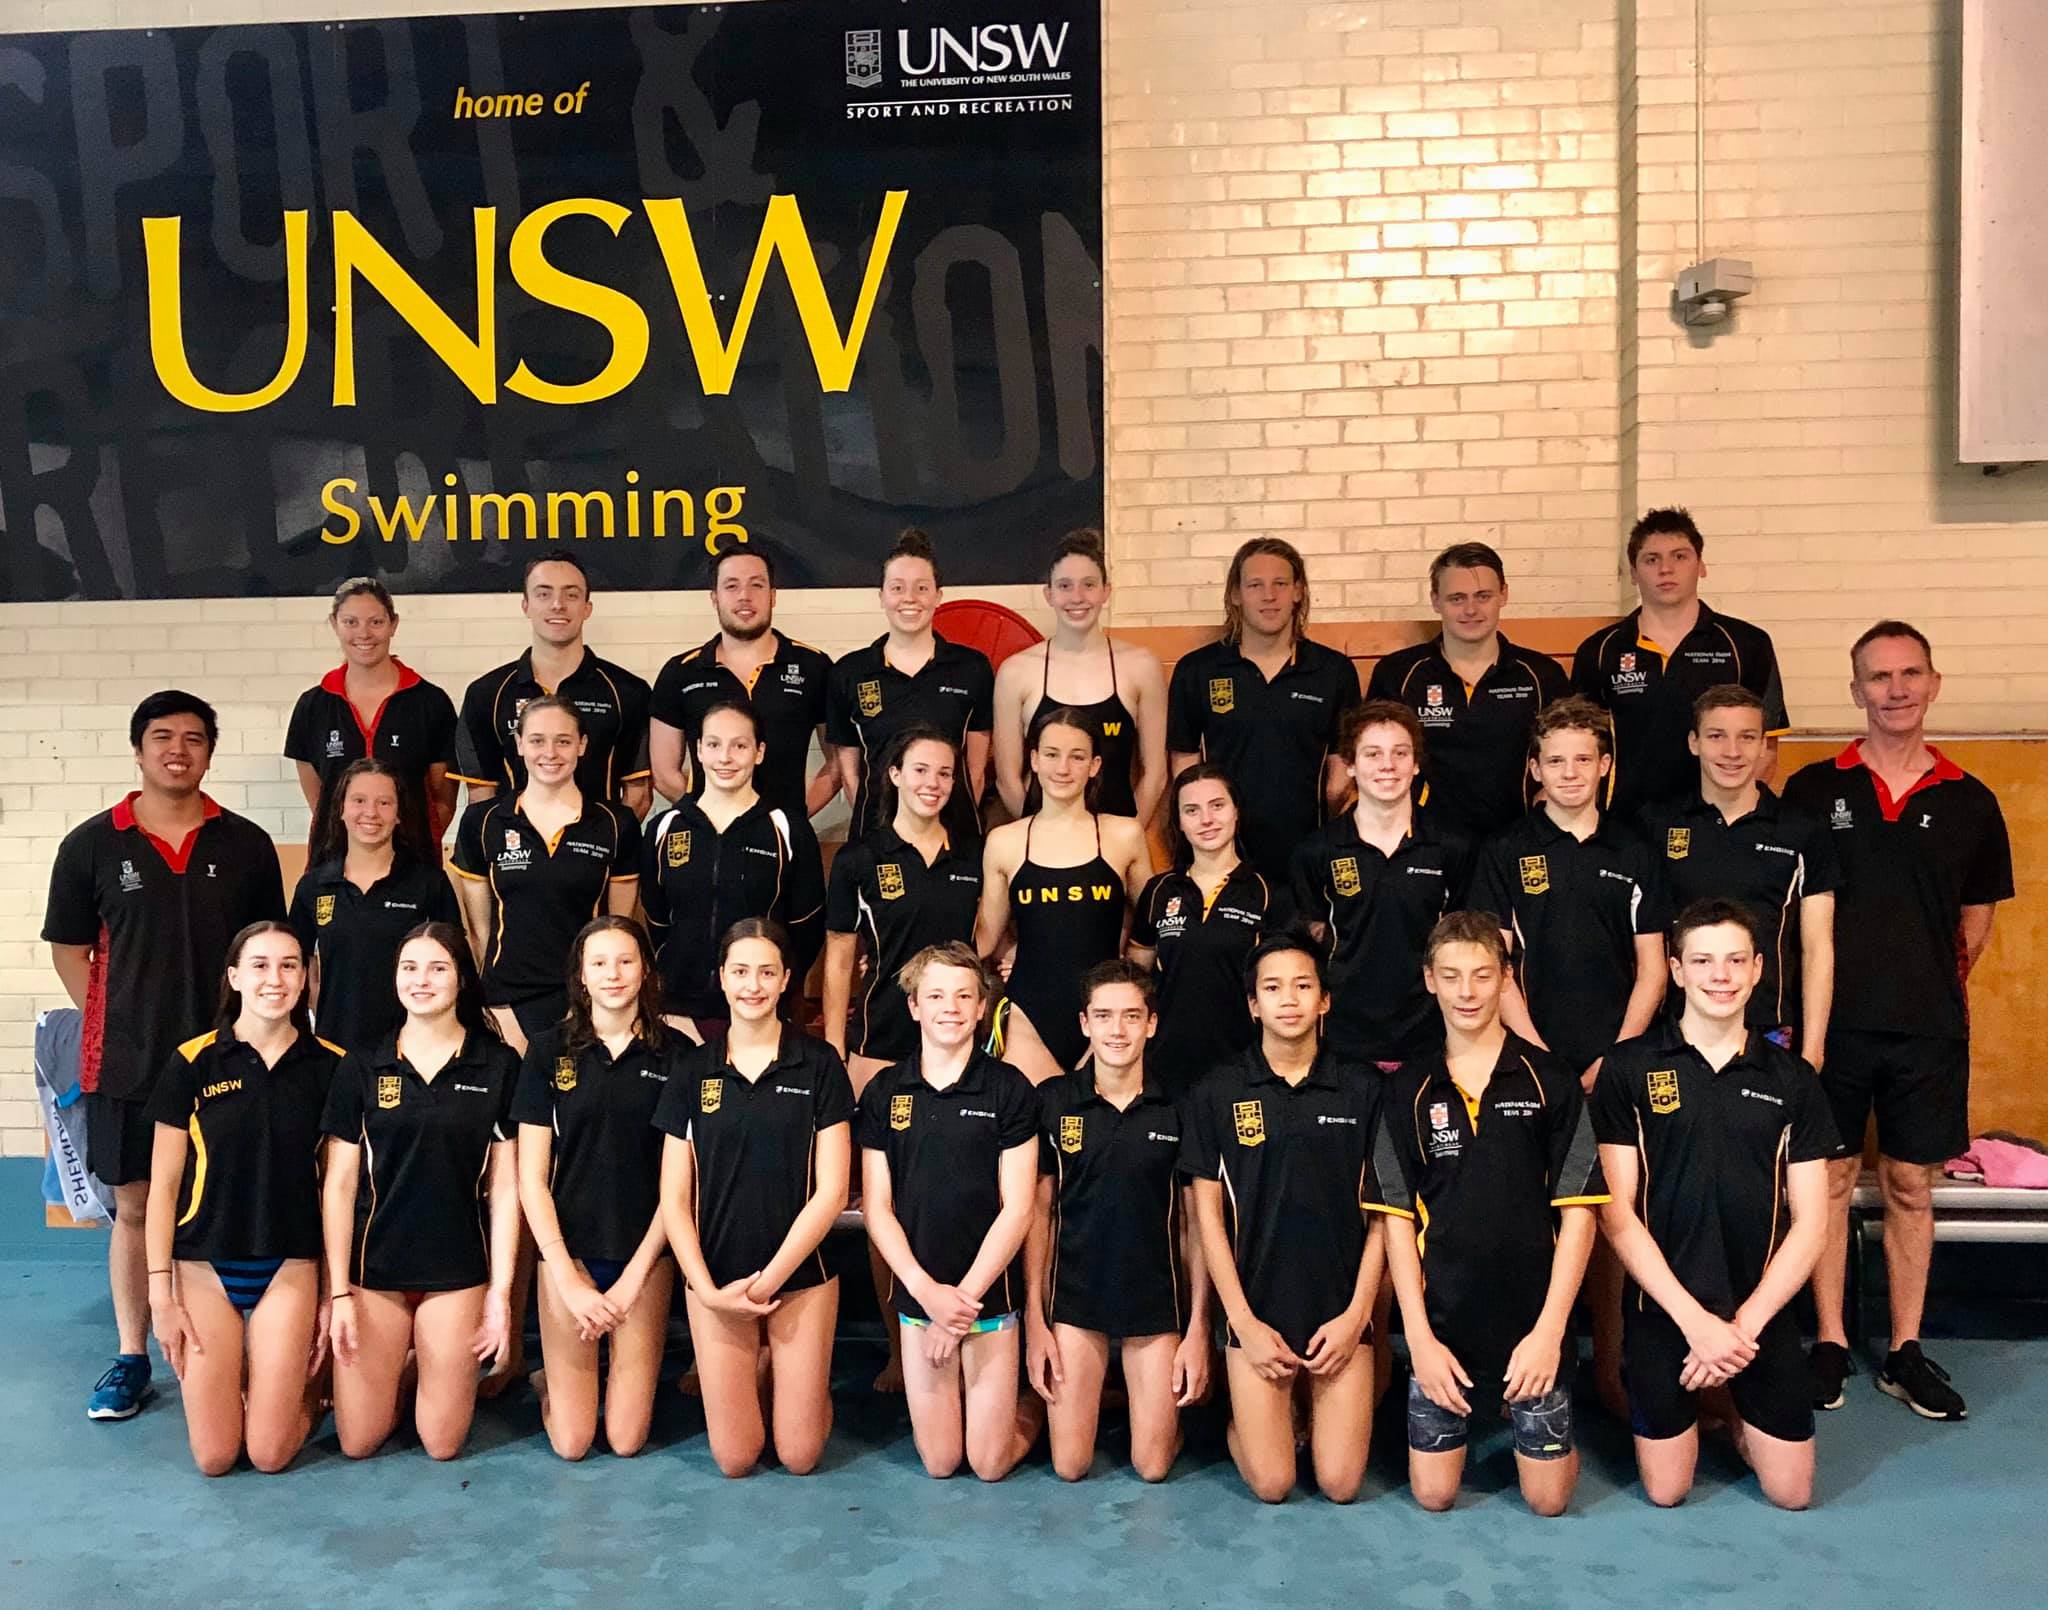 The UNSW Swimming Club won 17 medals at NSW Senior State Age Championships this week.